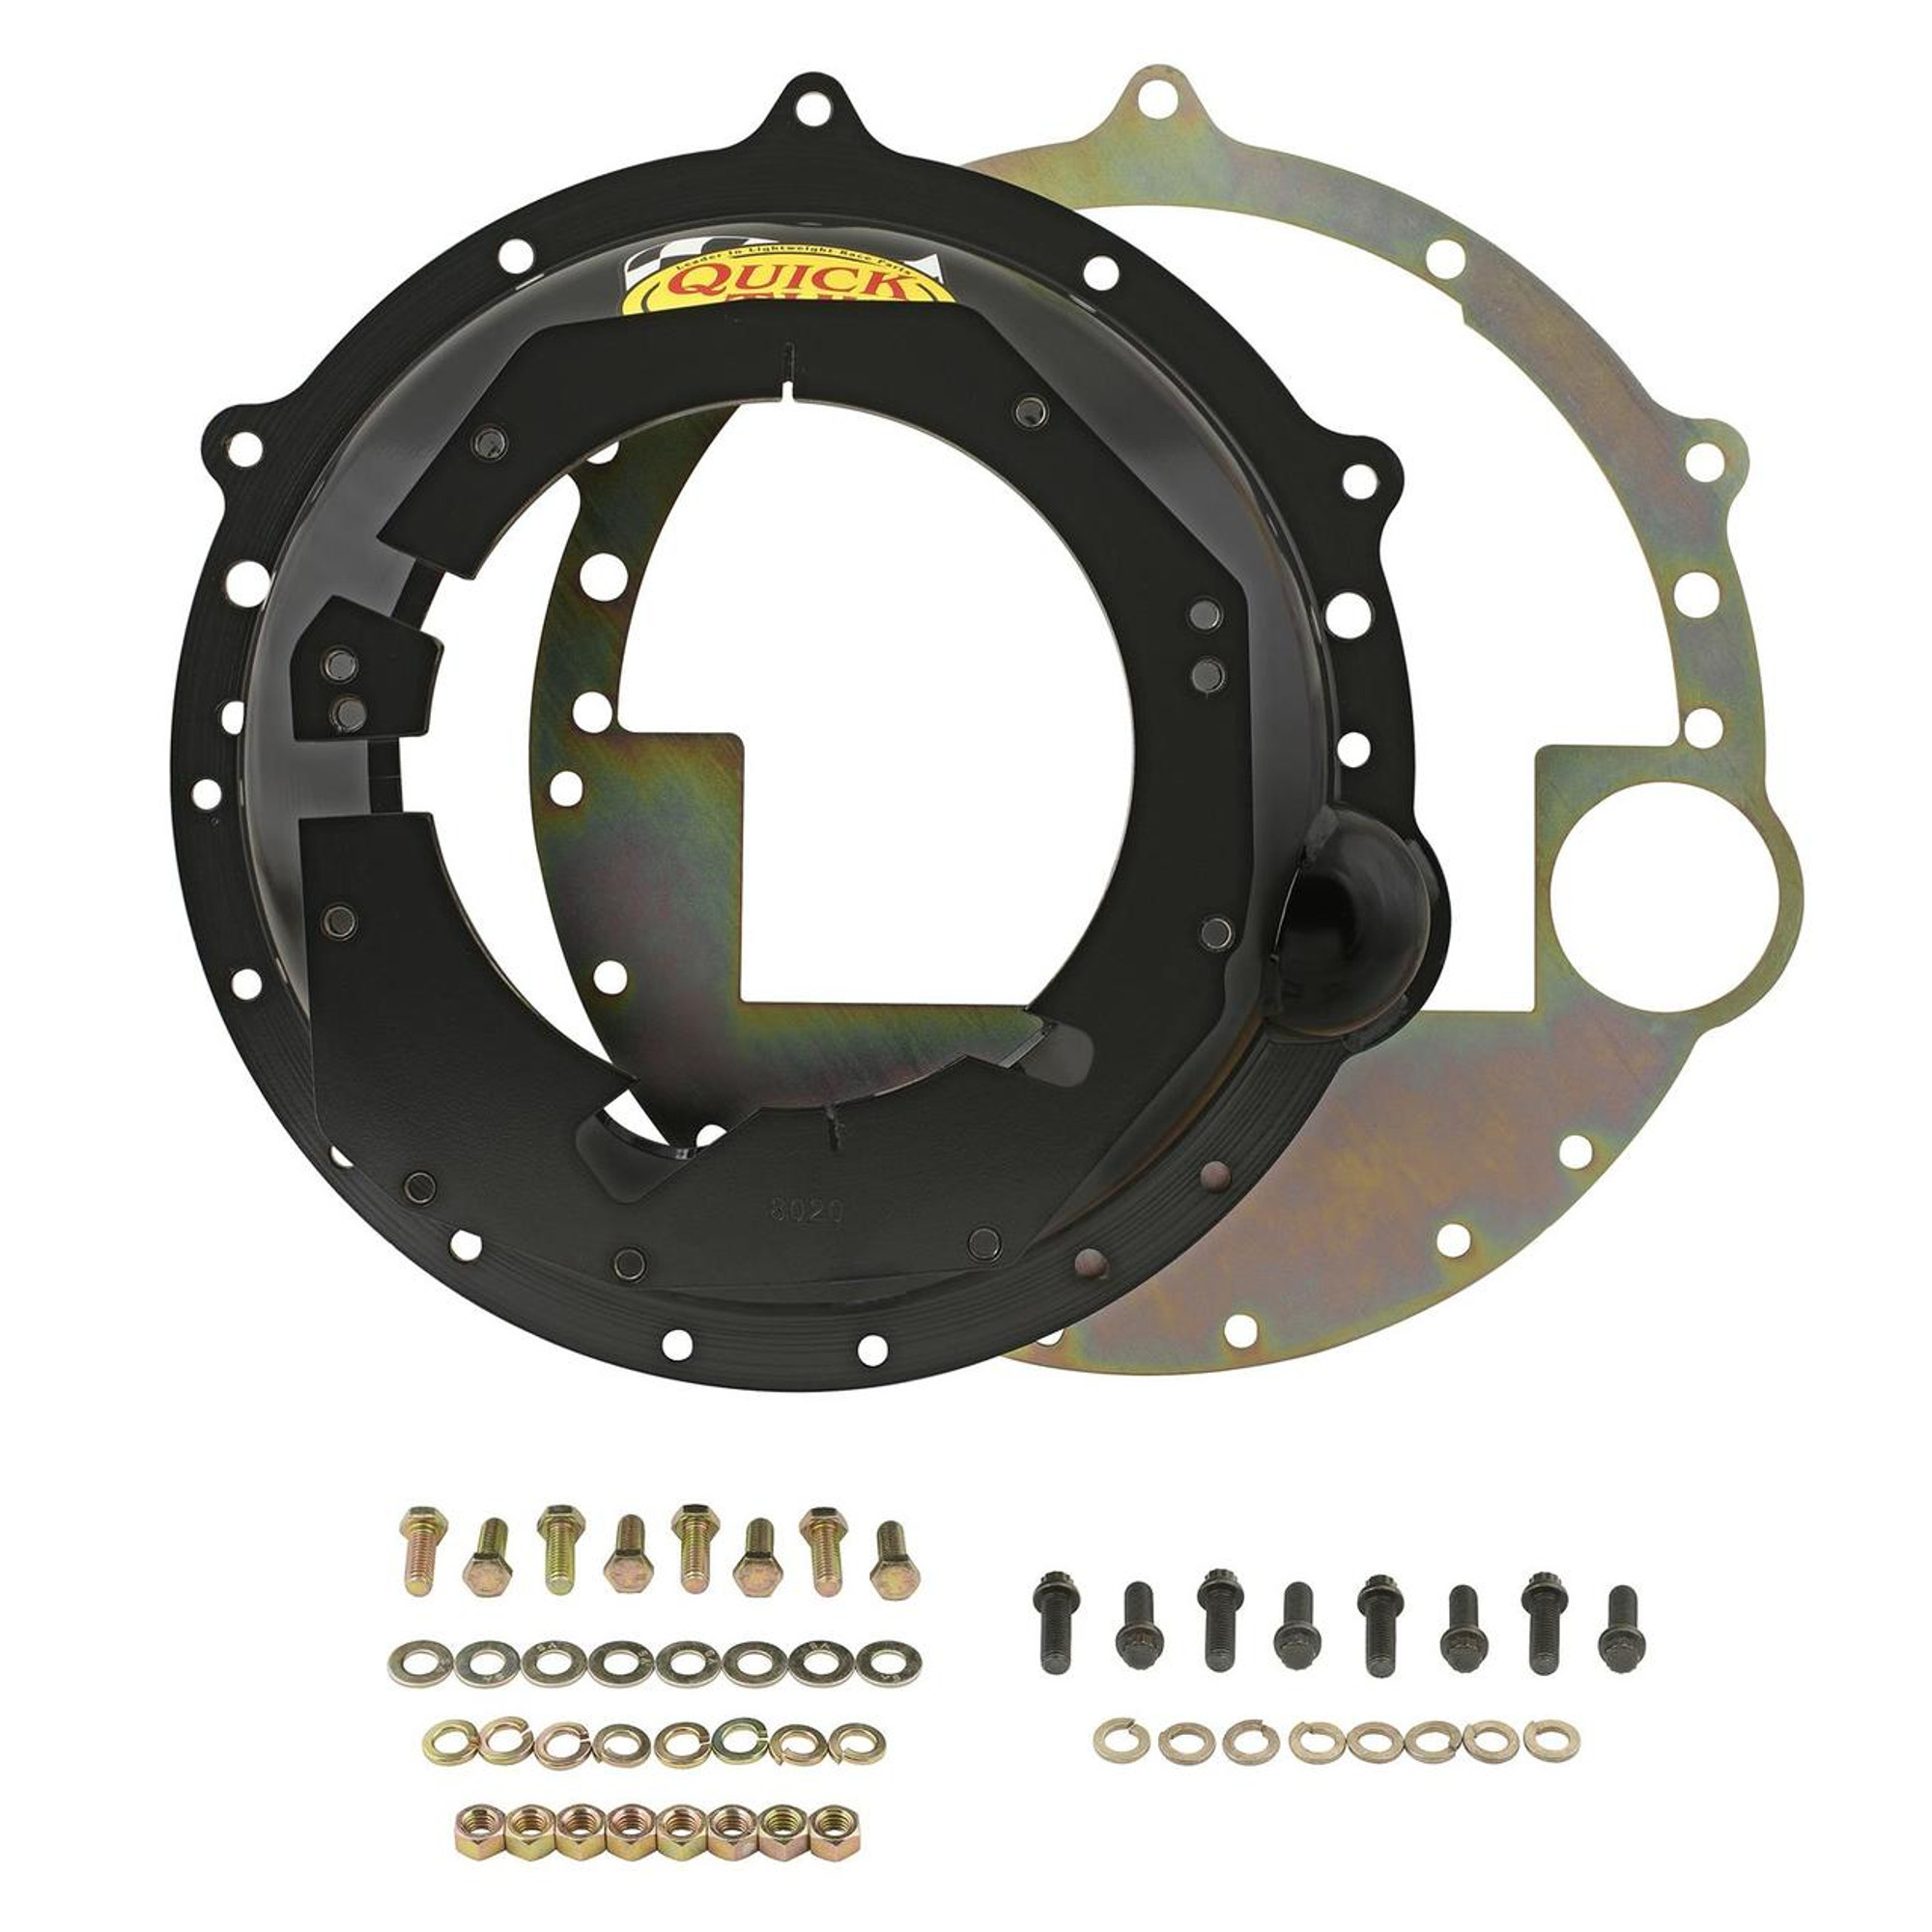 Quicktime Bellhousing for LS Series and Gen 5 LT Series Engines to LS ...